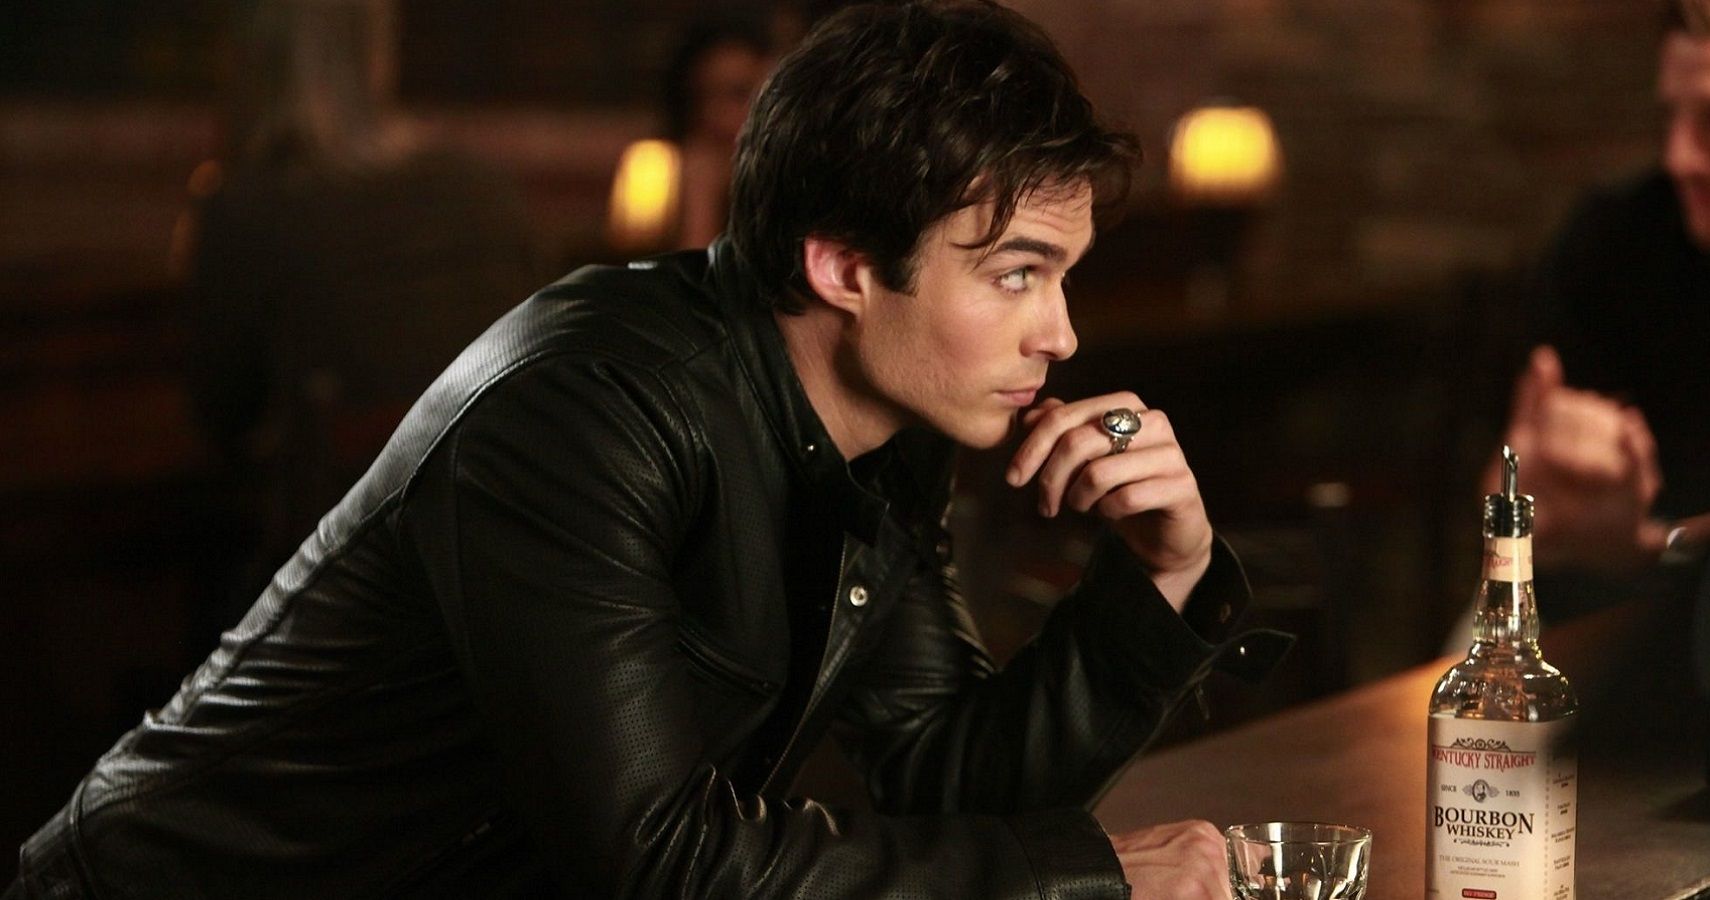 The Vampire Diaries 10 Most Shameless Things Damon Ever Did